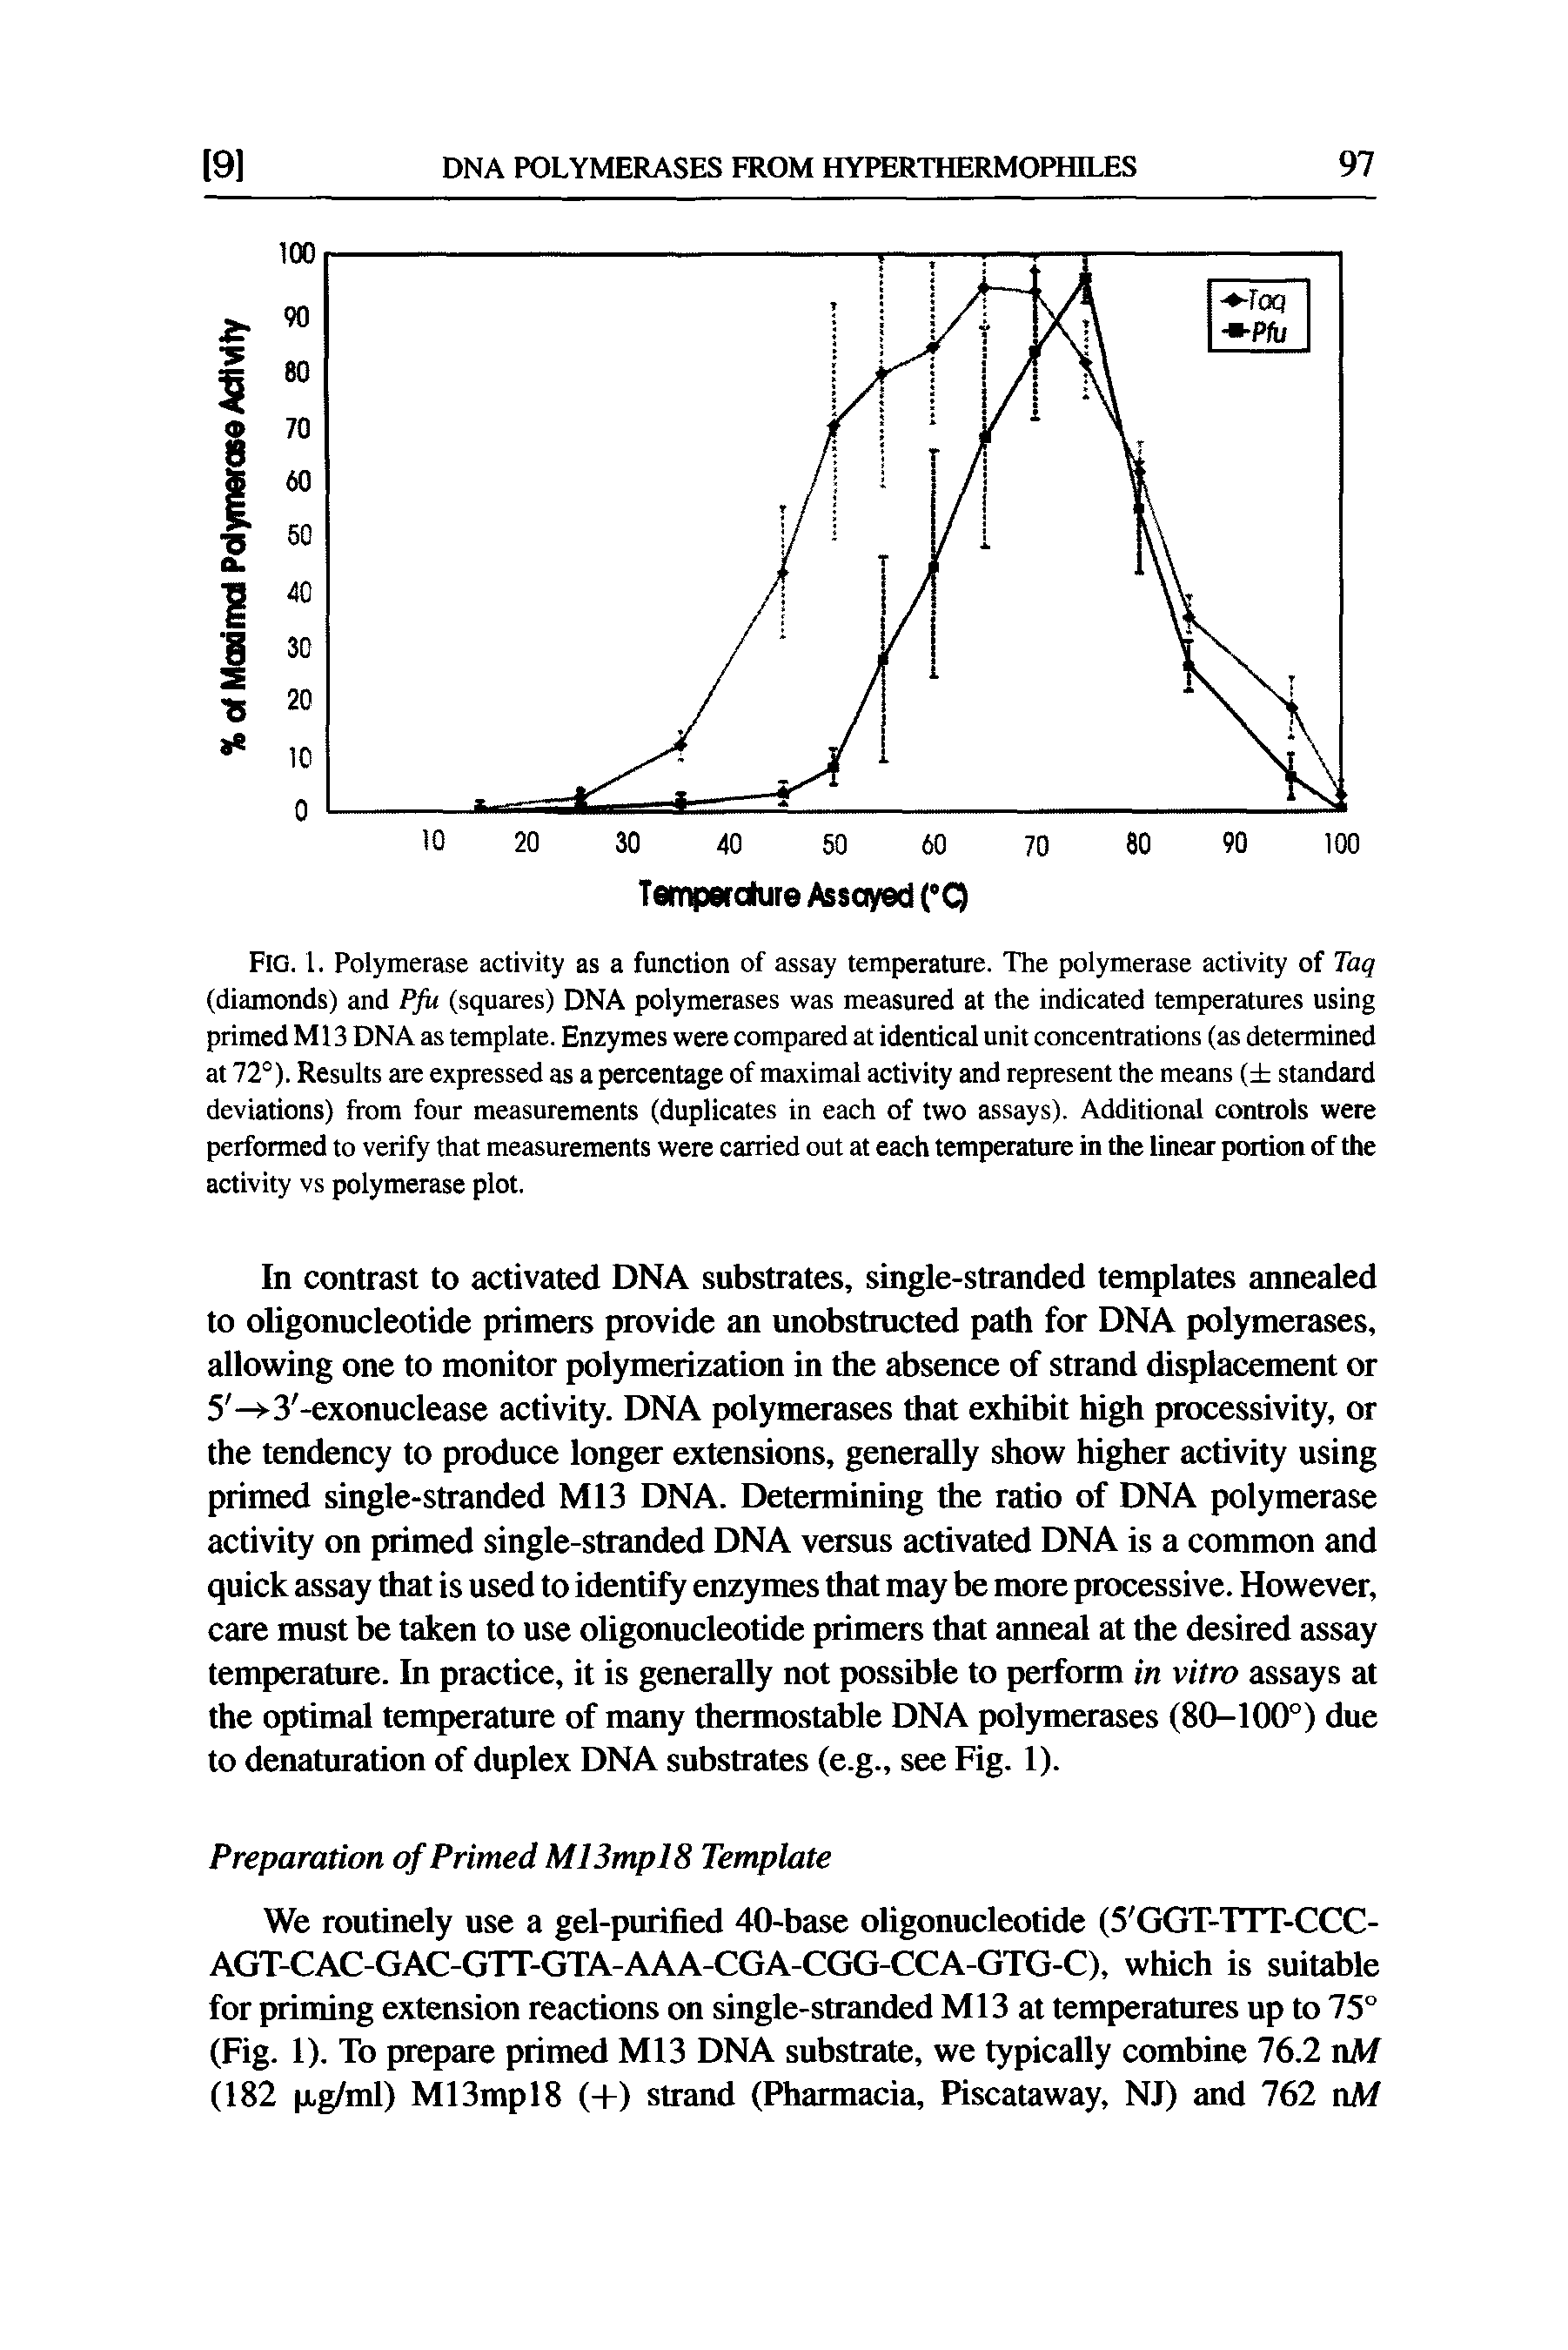 Fig. 1. Polymerase activity as a function of assay temperature. The polymerase activity of Tag (diamonds) and Pfu (squares) DNA polymerases was measured at the indicated temperatures using primed M13 DNA as template. Enzymes were compared at identical unit concentrations (as determined at 72°). Results are expressed as a percentage of maximal activity and represent the means ( standard deviations) linom four measurements (duplicates in each of two assays). Additional controls were performed to verify that measurements were carried out at each temperature in the linear portion of the activity vs polymerase plot.